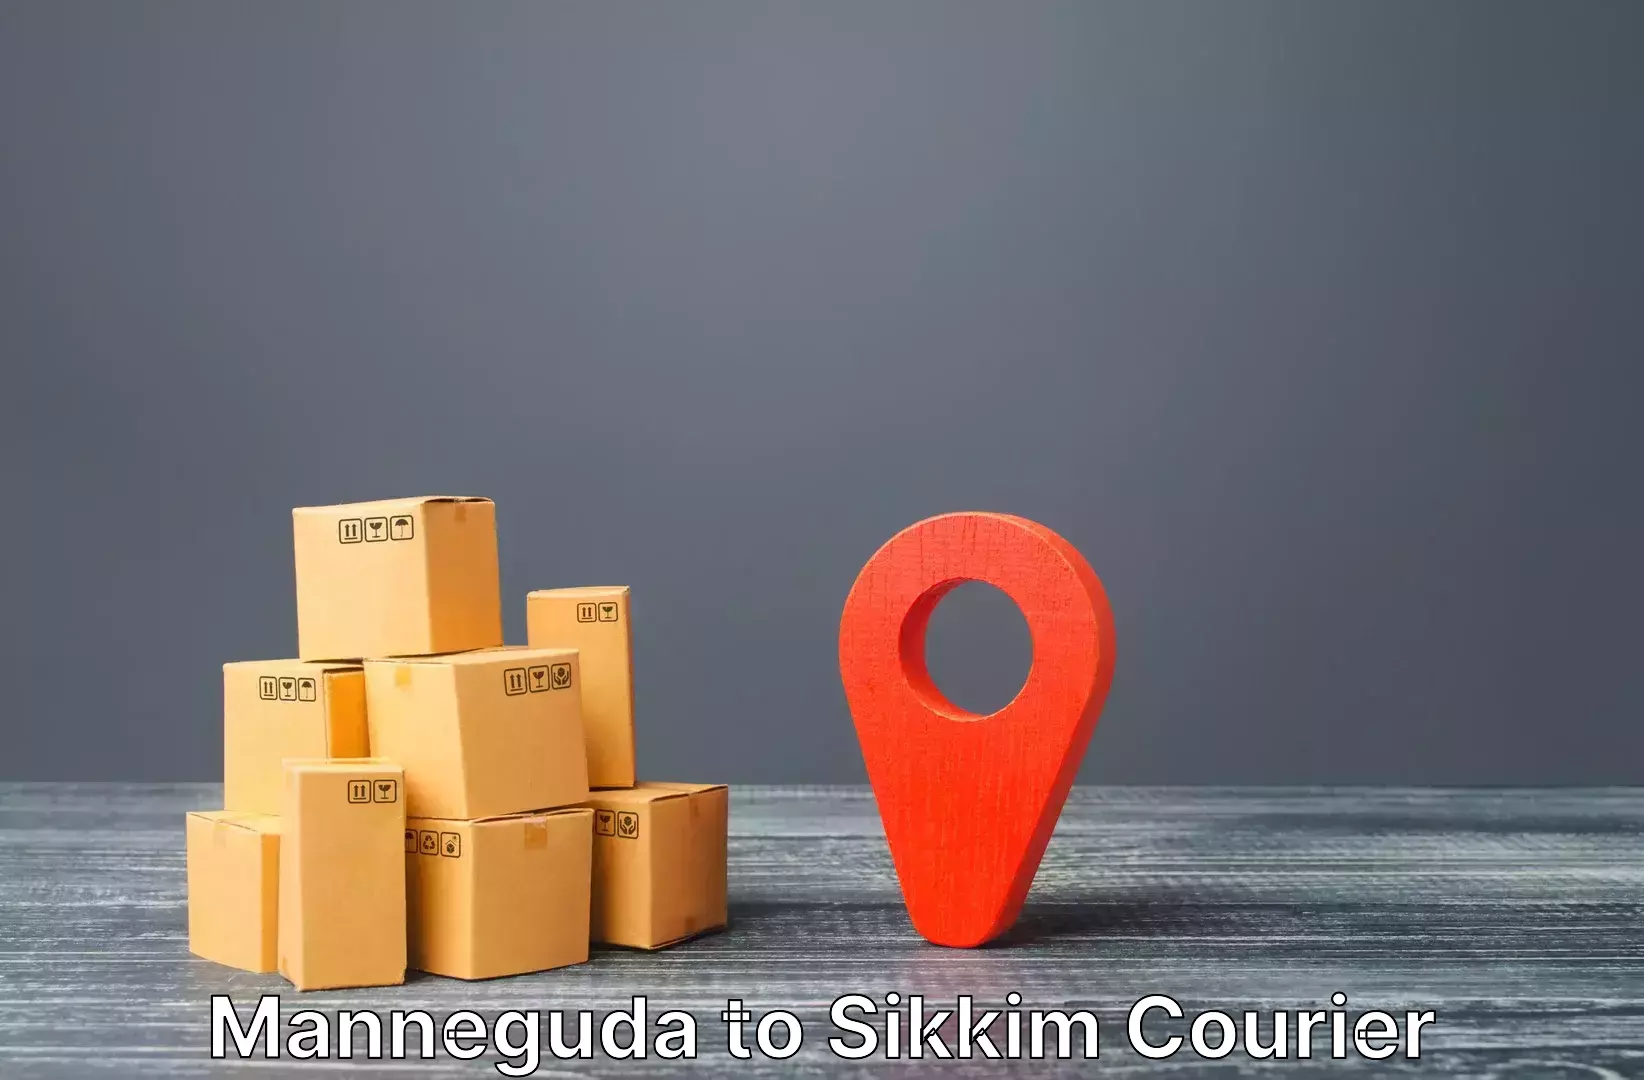 Hotel to Door baggage transport Manneguda to Sikkim